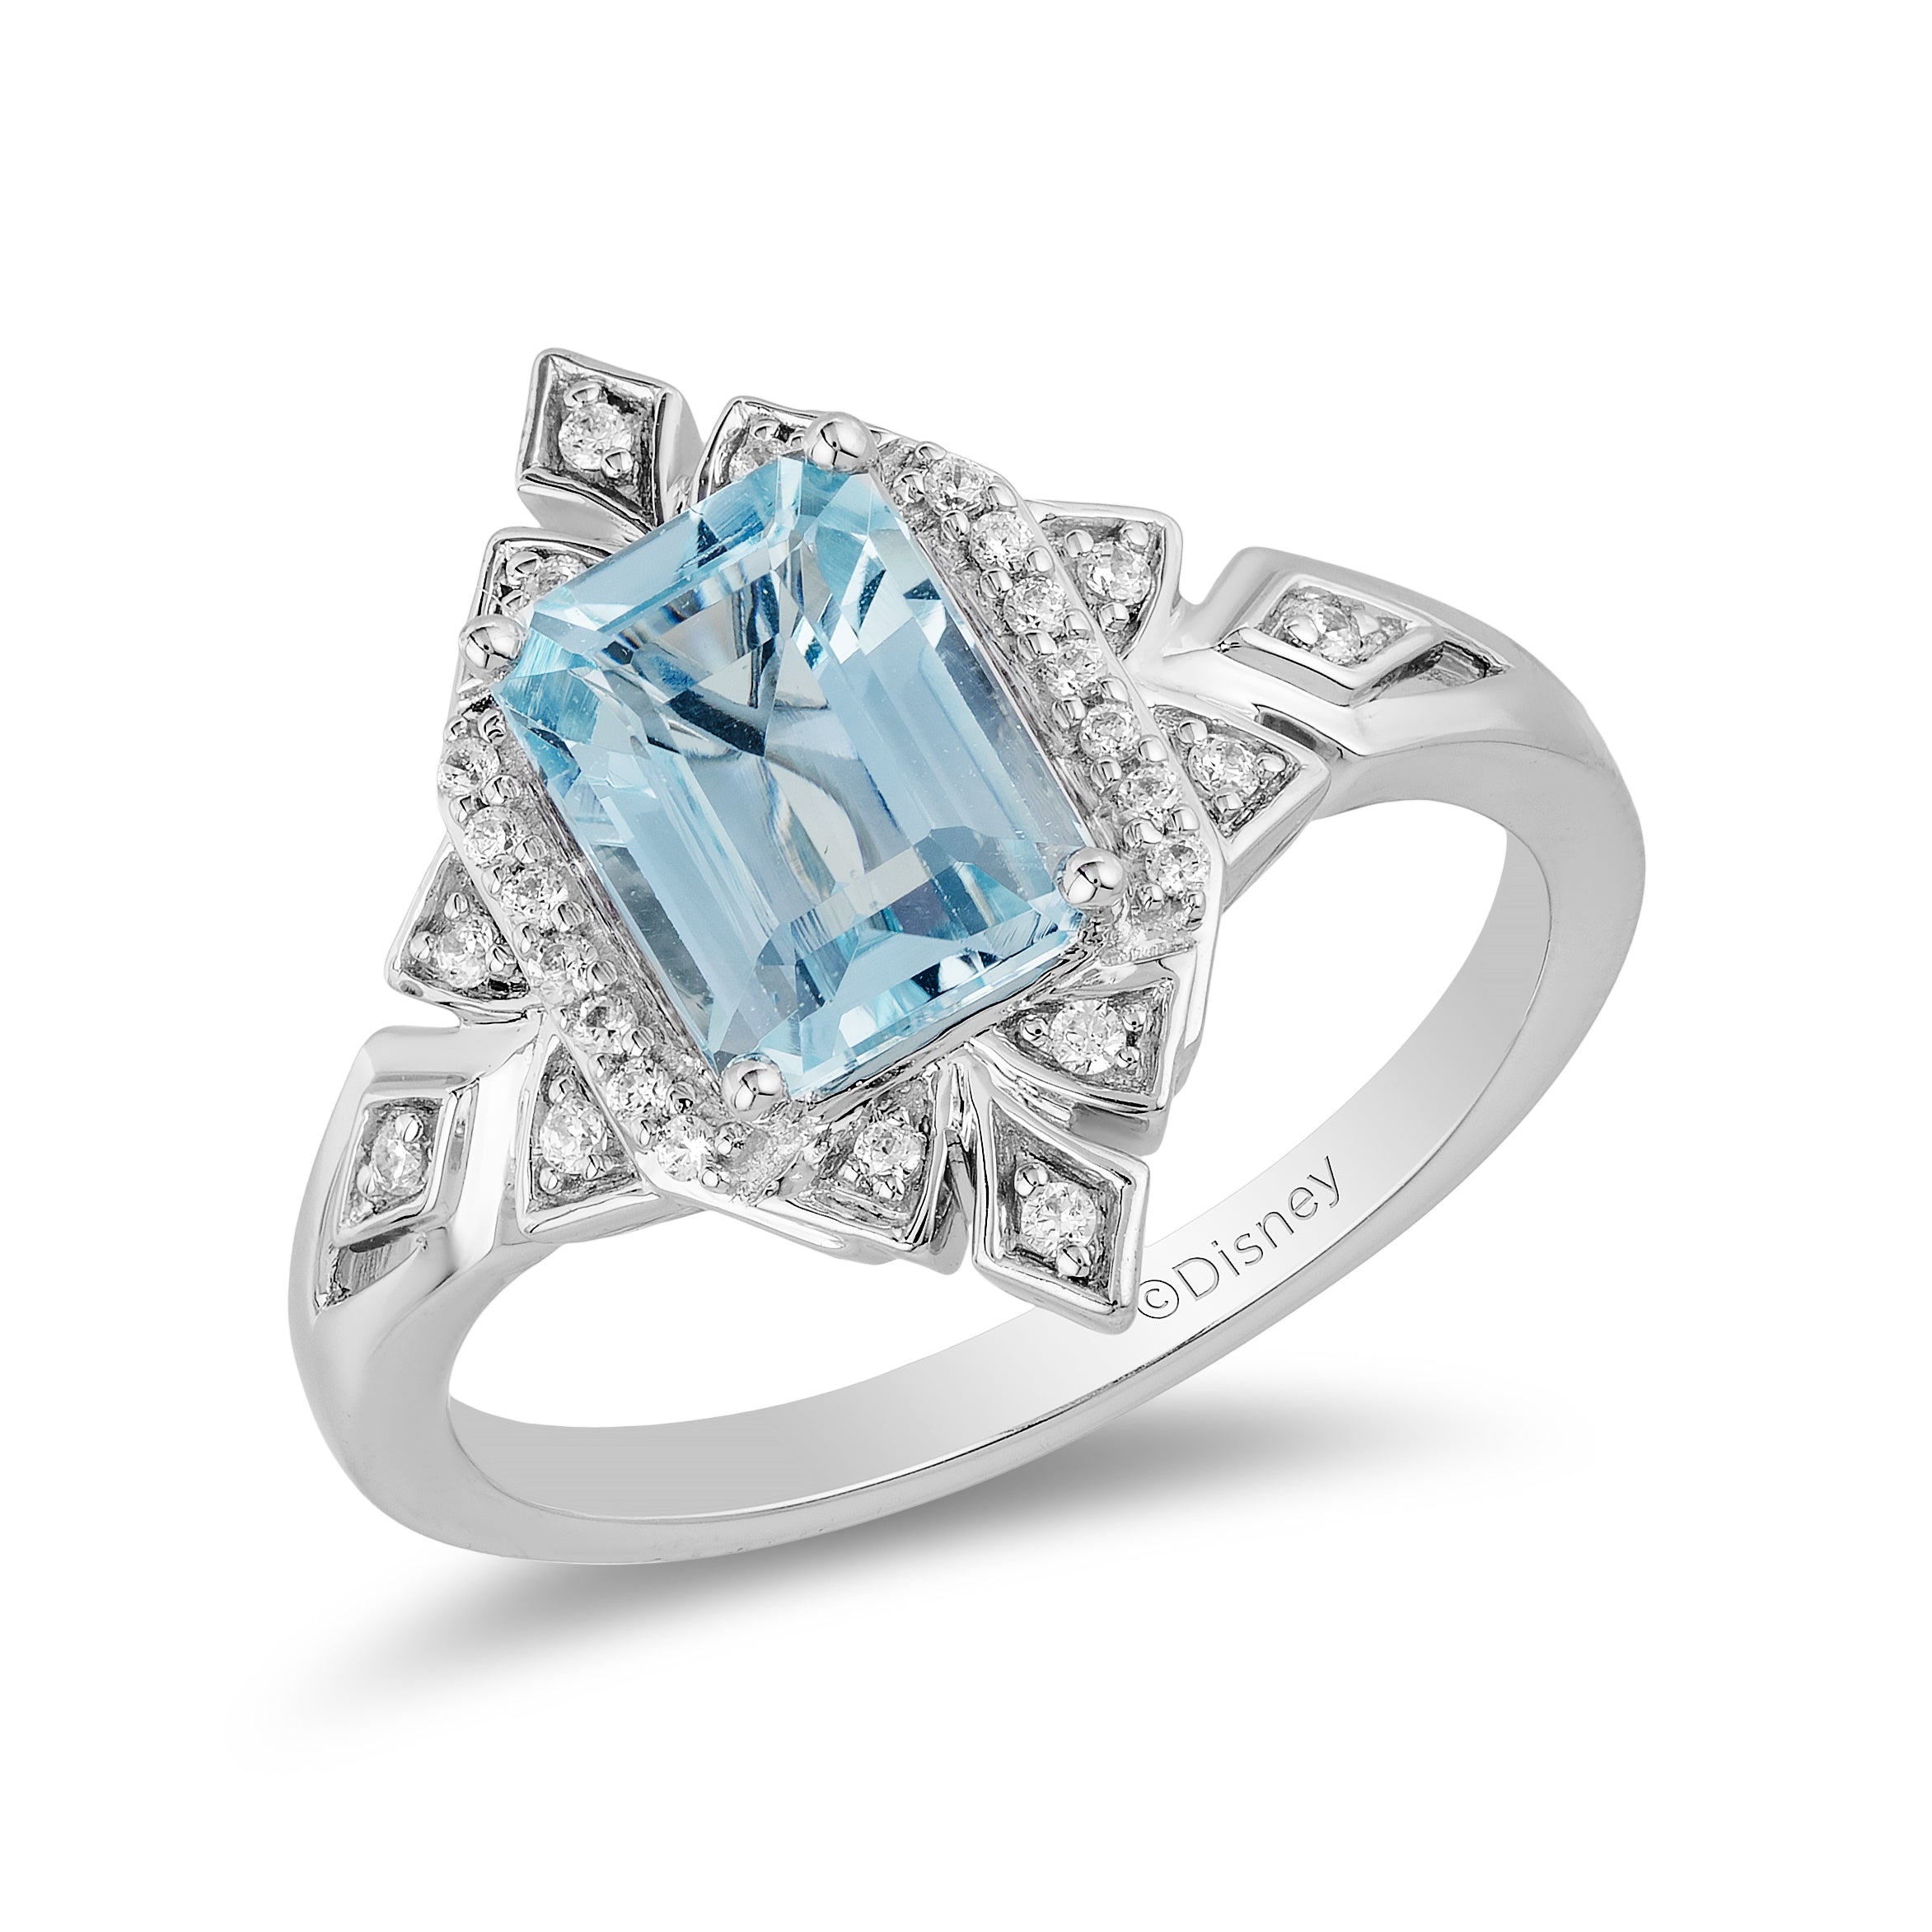 Amazon.com: PEORA Created Alexandrite Ring for Women in 14K White Gold with  Genuine White Topaz, Color Changing Cushion Cut, 2.78 Carats total, Comfort  Fit, Size 5: Clothing, Shoes & Jewelry